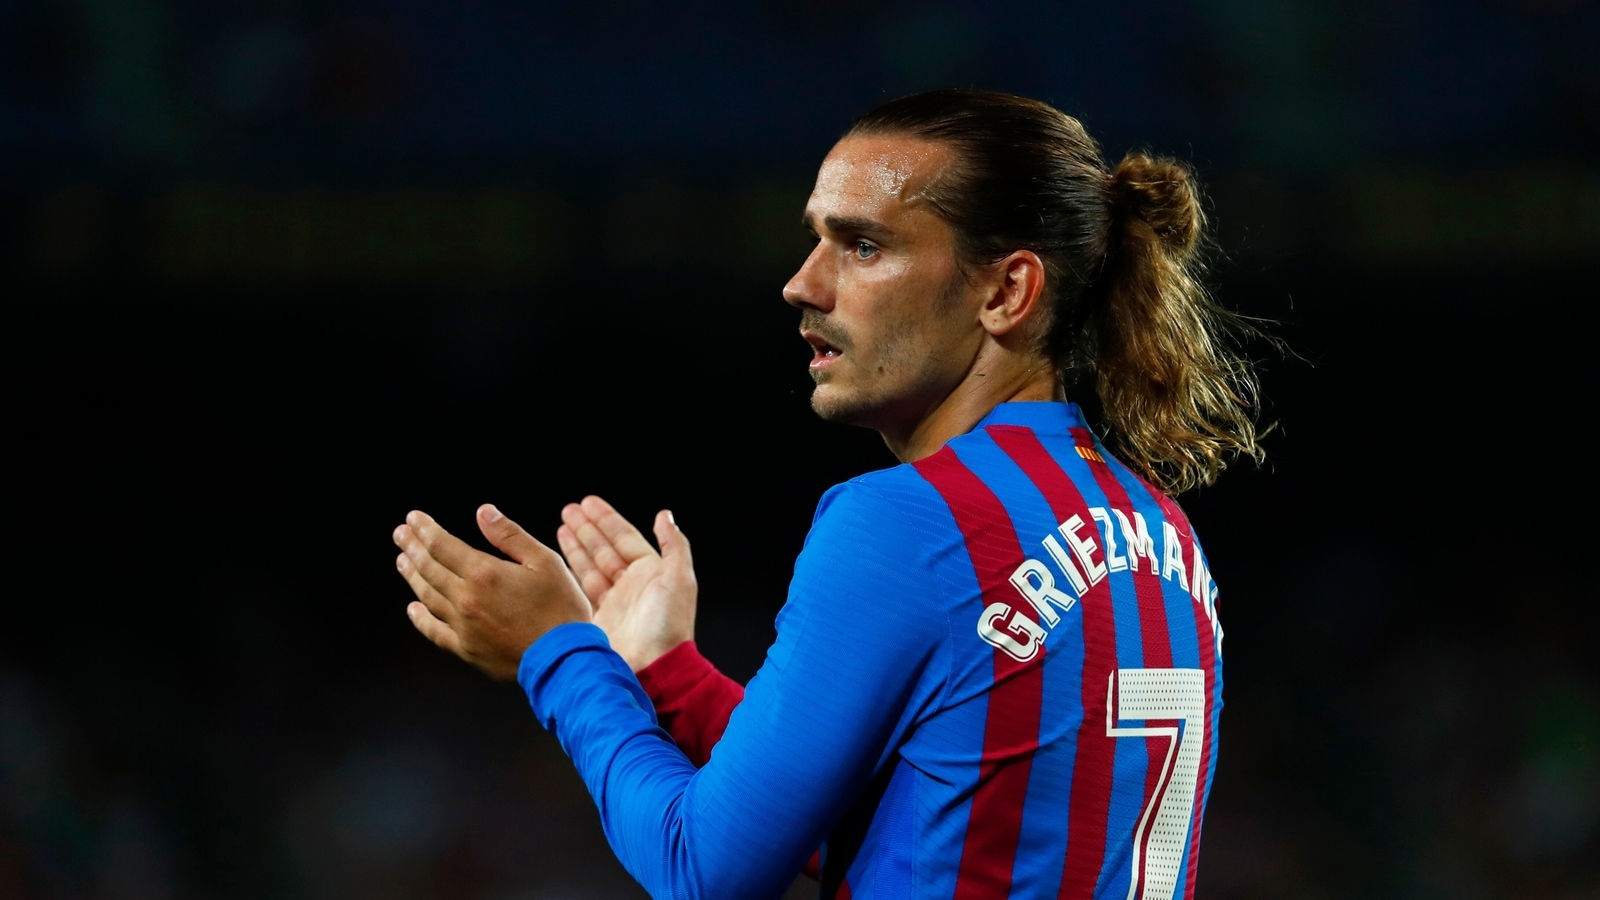 Chelsea shirt numbers Antoine Griezmann could wear with Barcelona to offer  deal  Football  Sport  Expresscouk